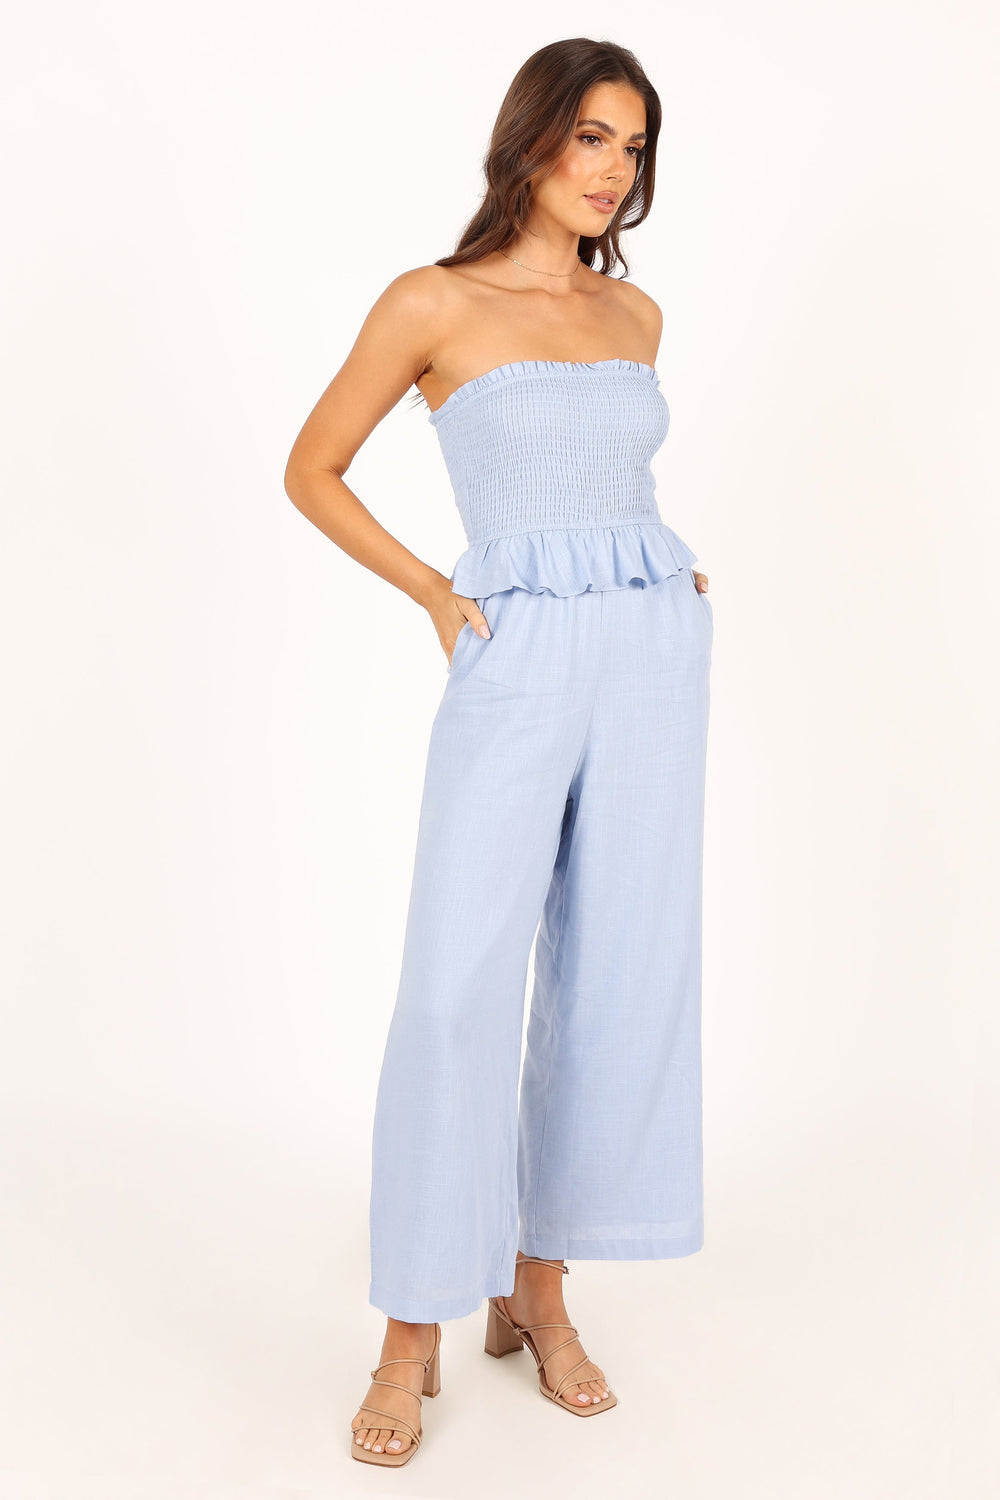 Petal and Pup USA Rompers Elle strapless Jumpsuit - Blue